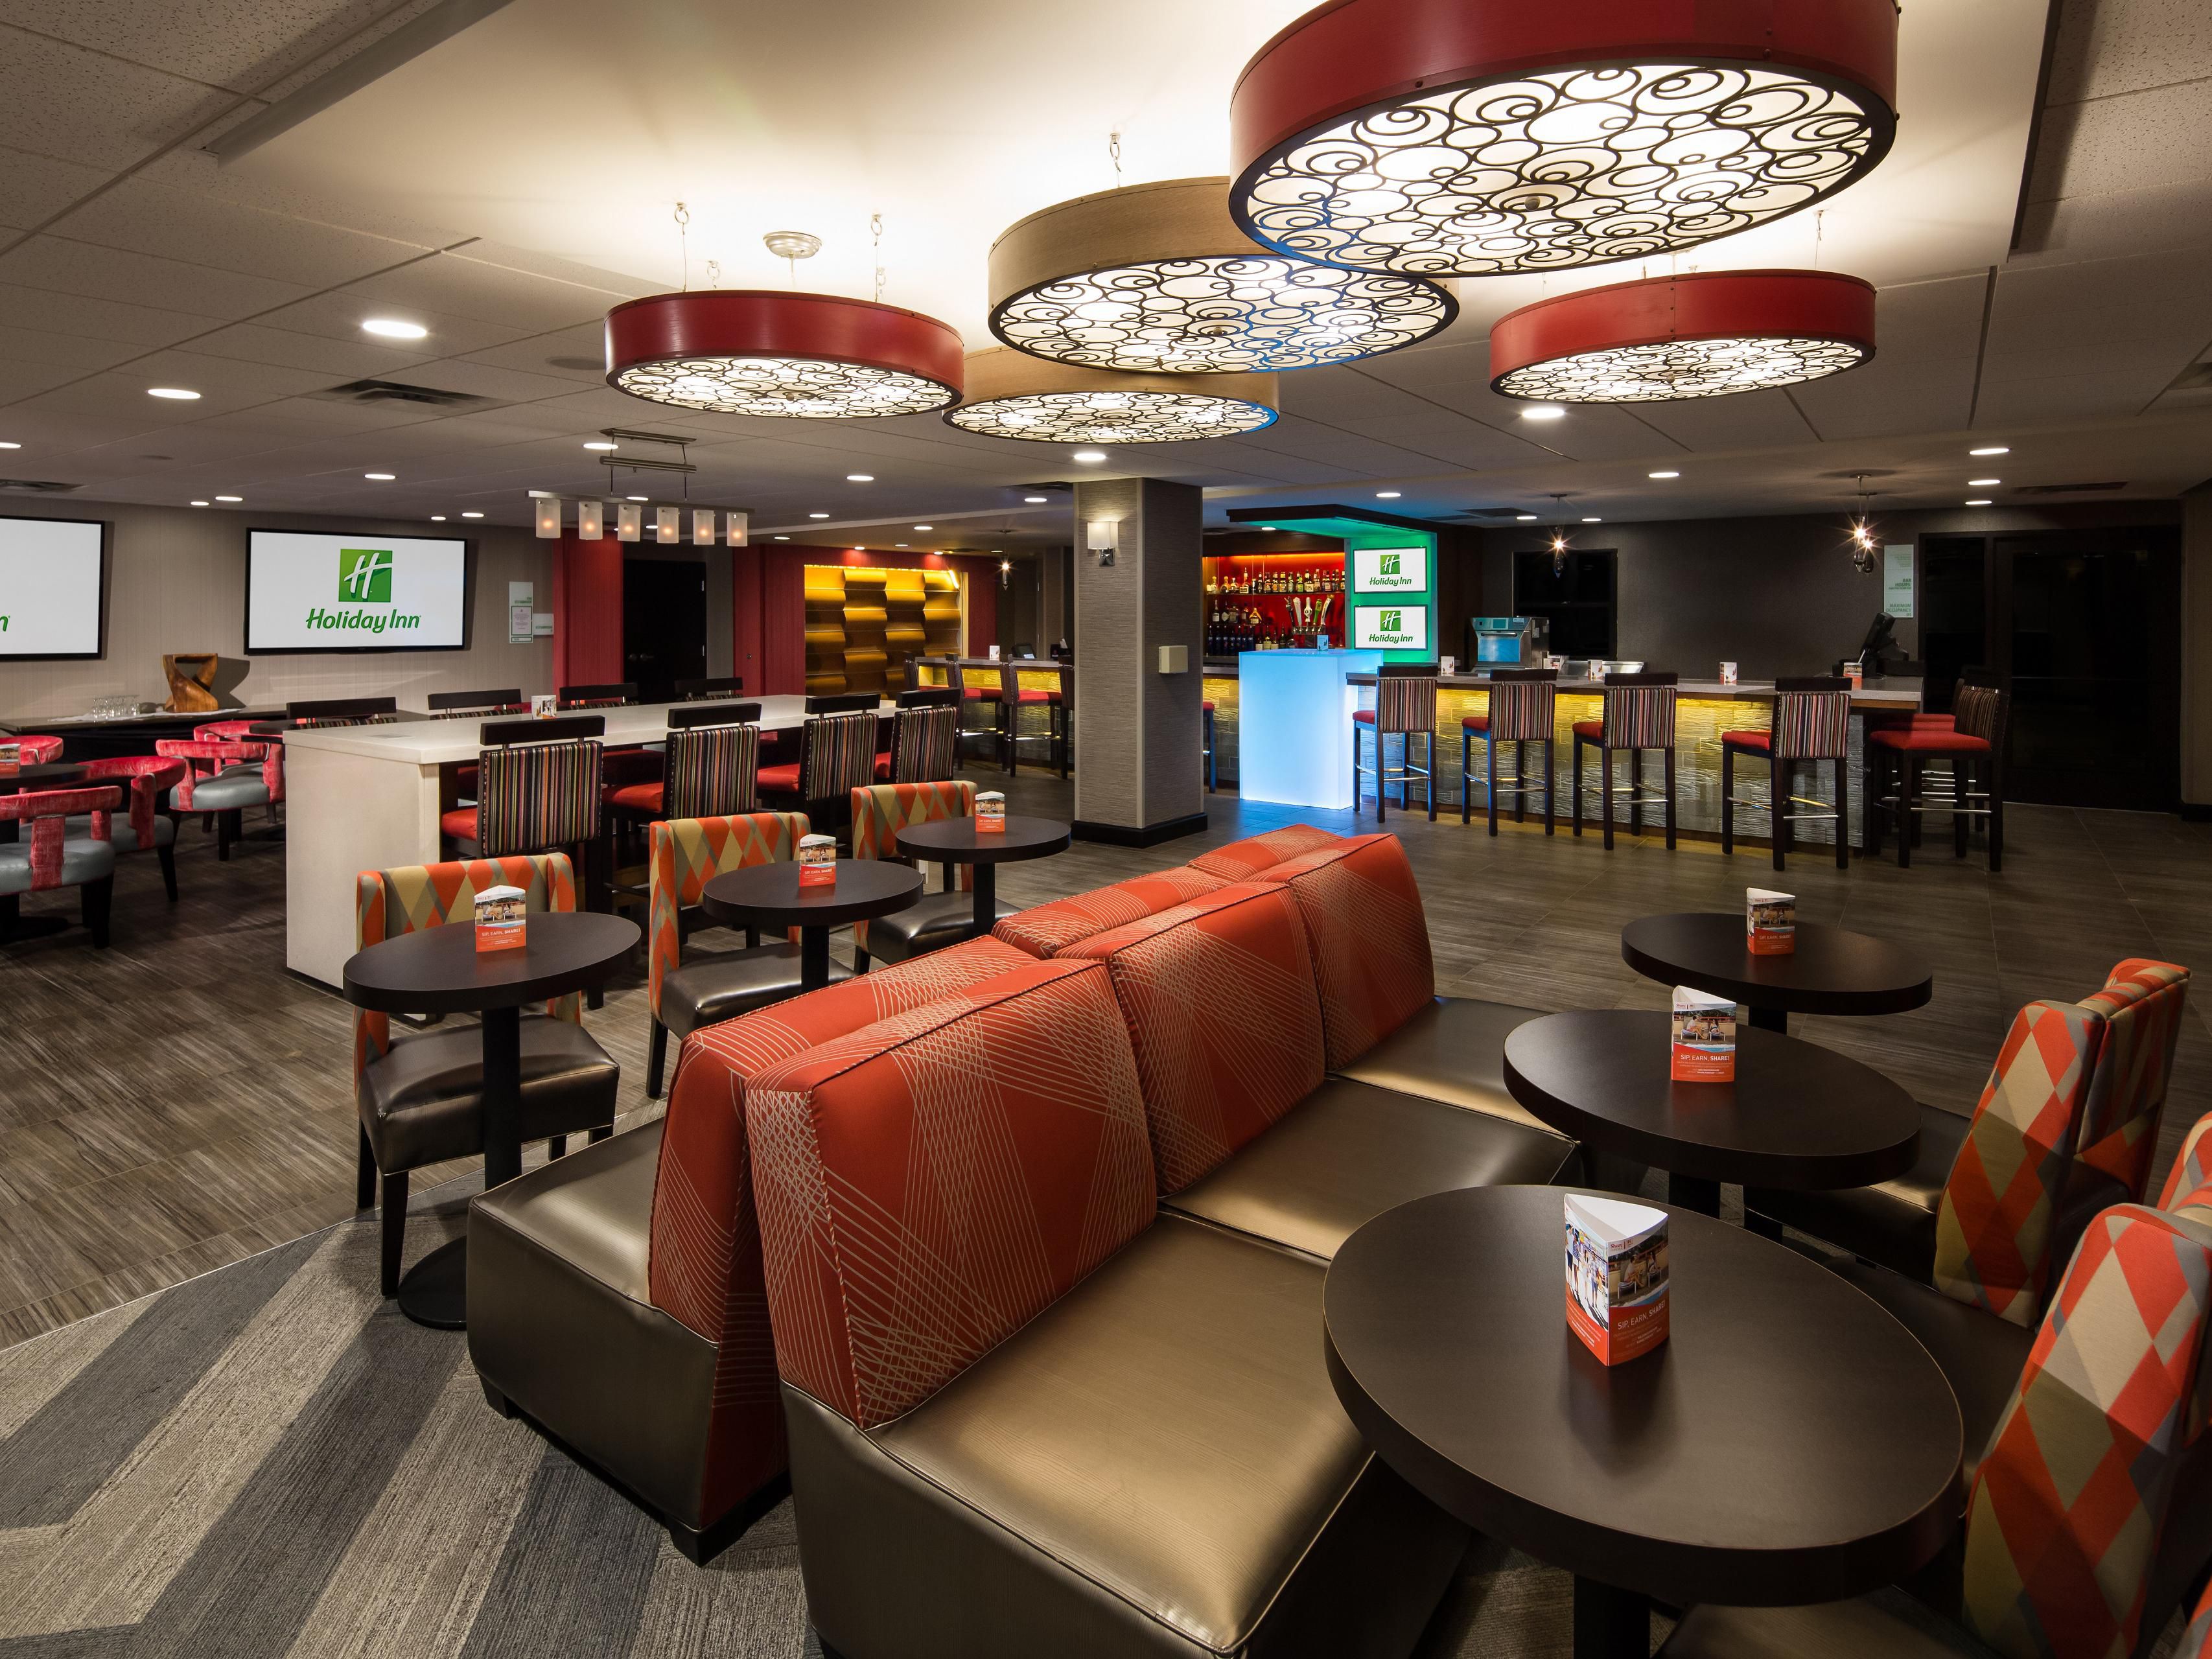 Enjoy casual dining at our inviting Anchorage Lounge and Restaurant near Downtown Milwaukee. Our a-la-carte menu features mouthwatering American cuisine and local favorites for breakfast and dinner.